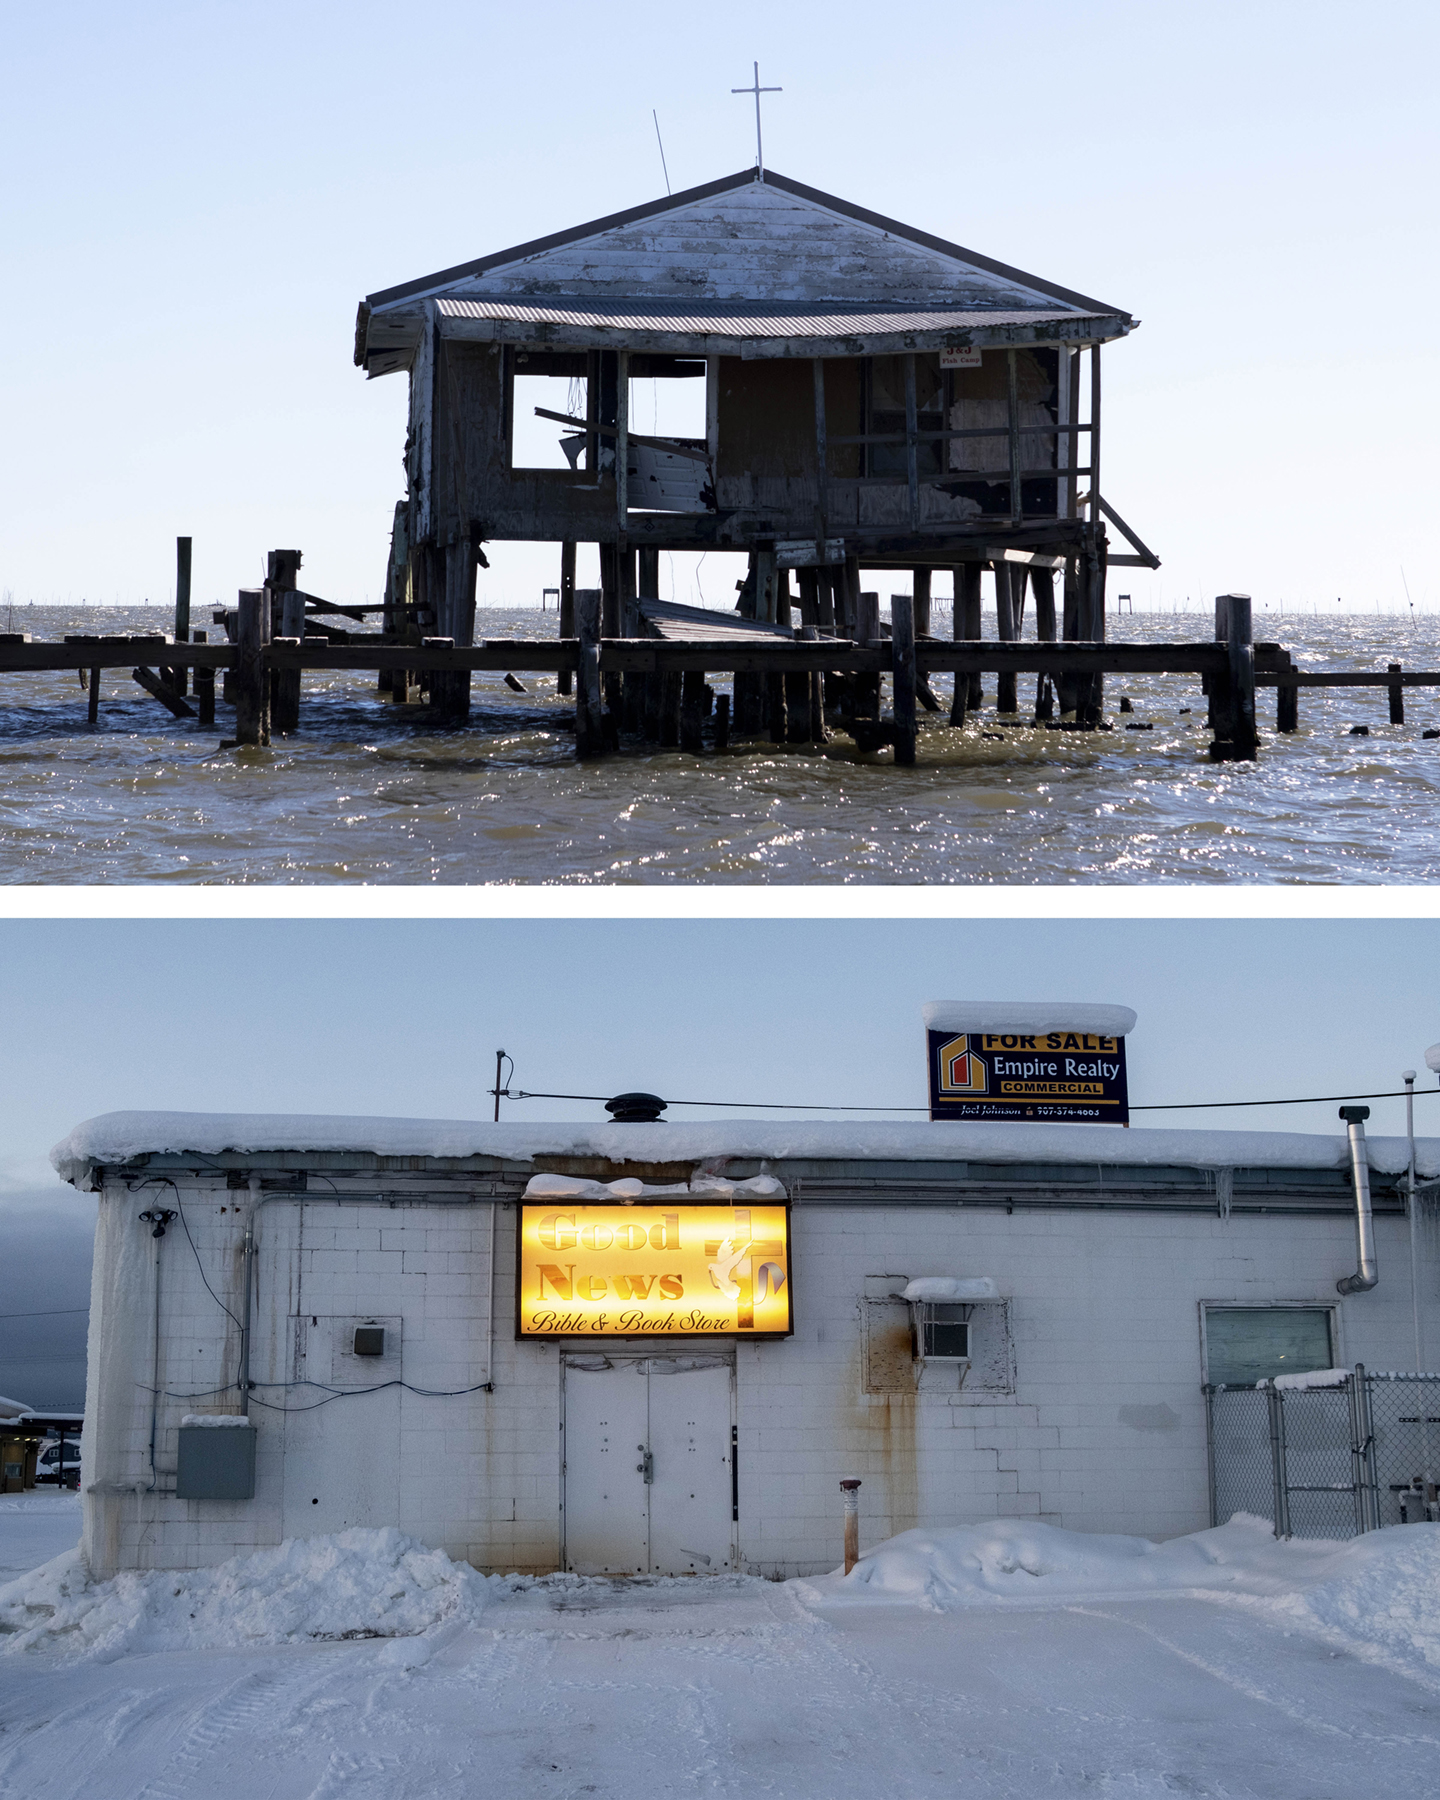 A shack on the beach and a building in the snow, courtesy of the artist